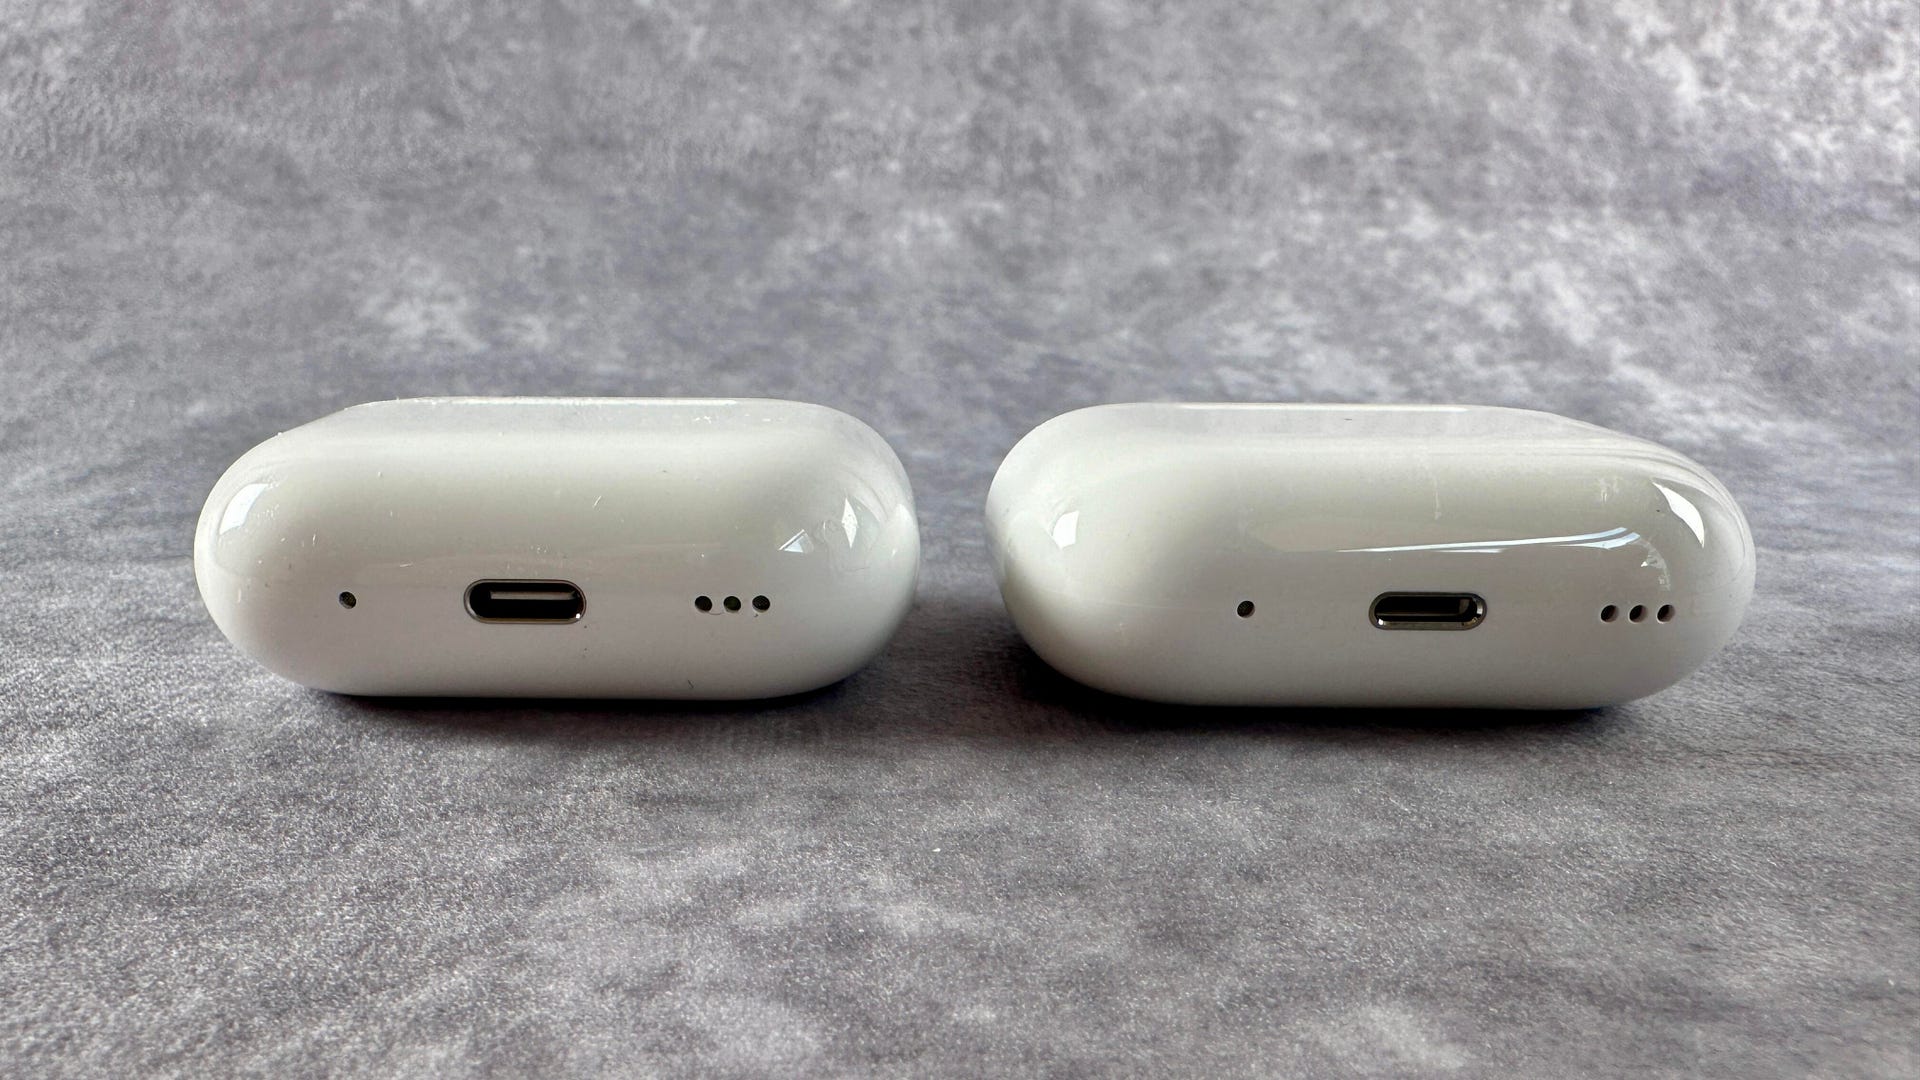 AirPods Pro 2 USB-C looks the same except for the port